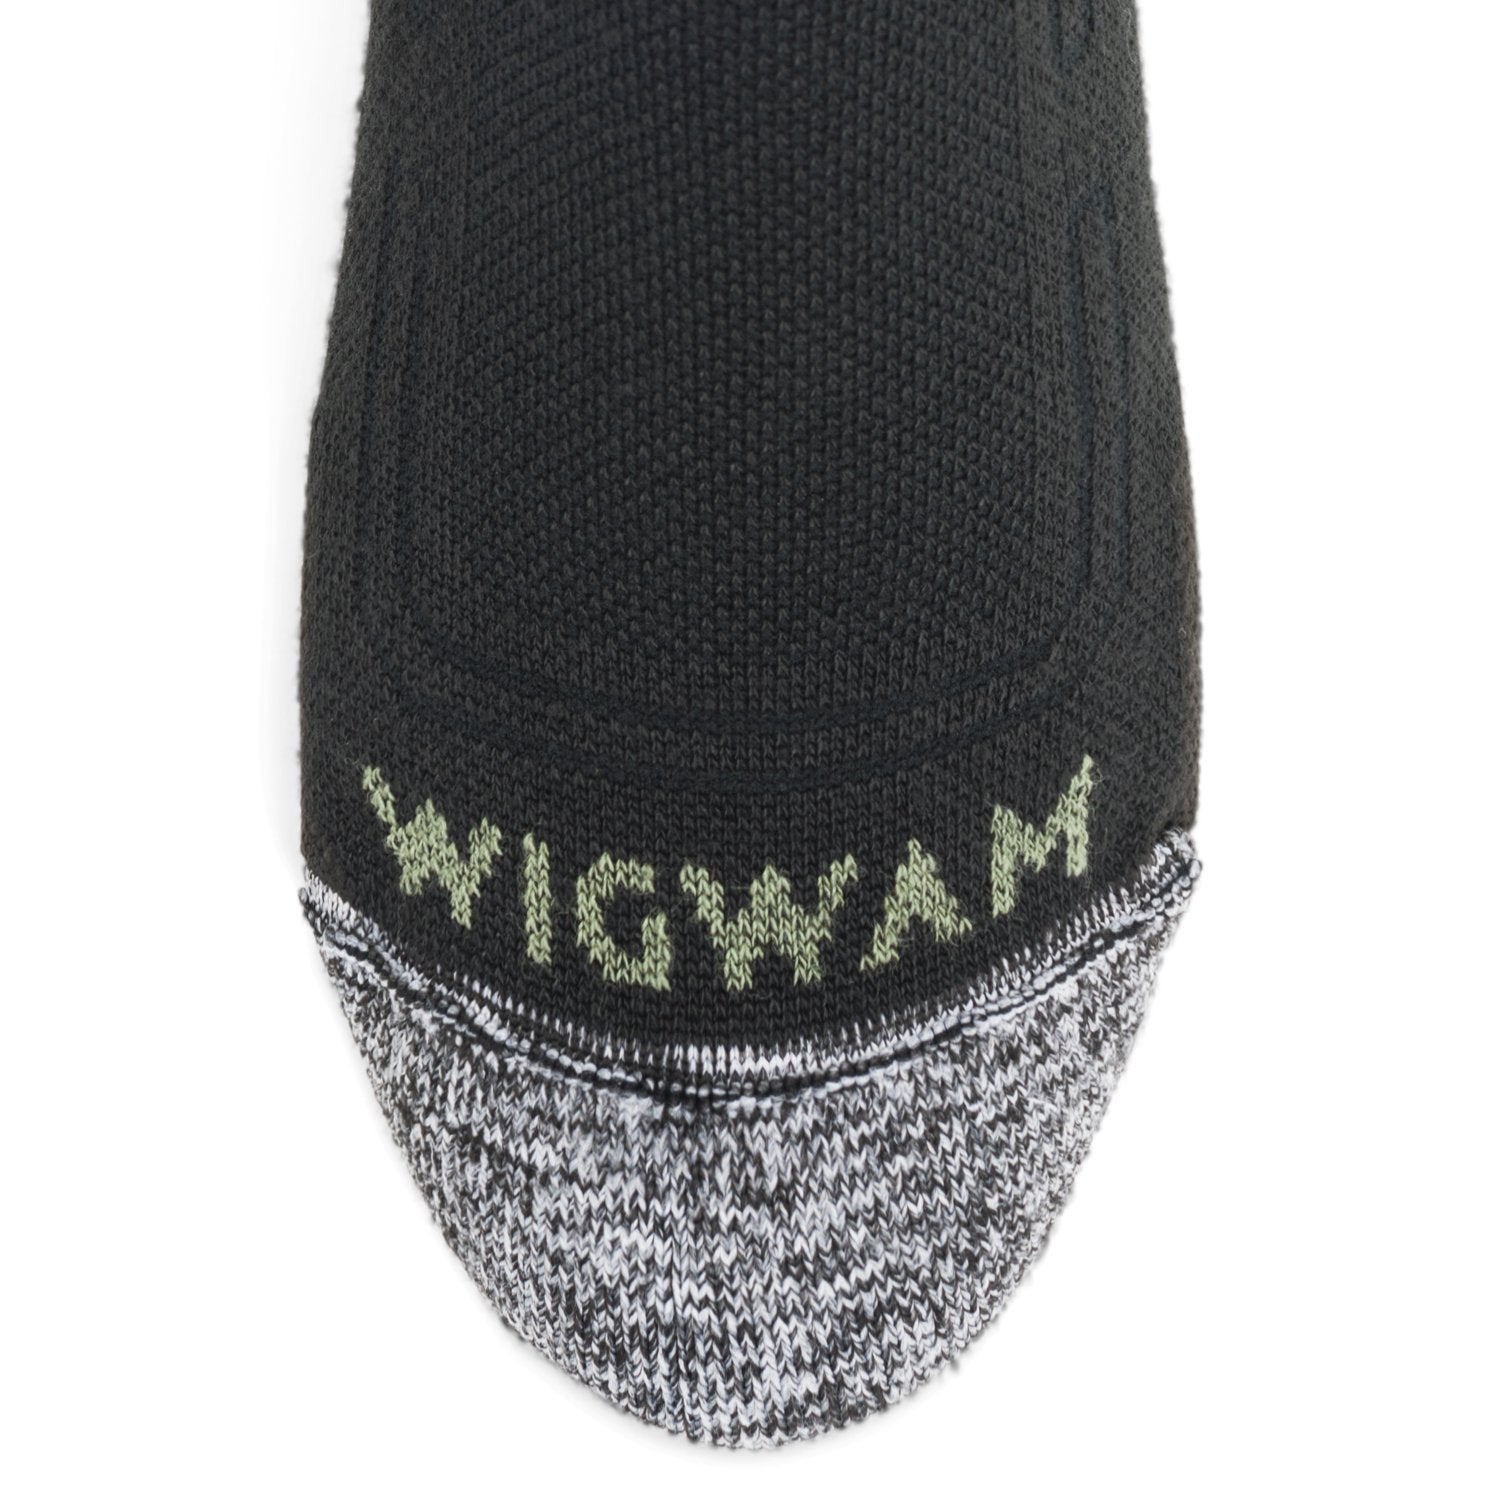 No Fly Zone Outdoor Crew Sock - Black toe perspective - made in The USA Wigwam Socks